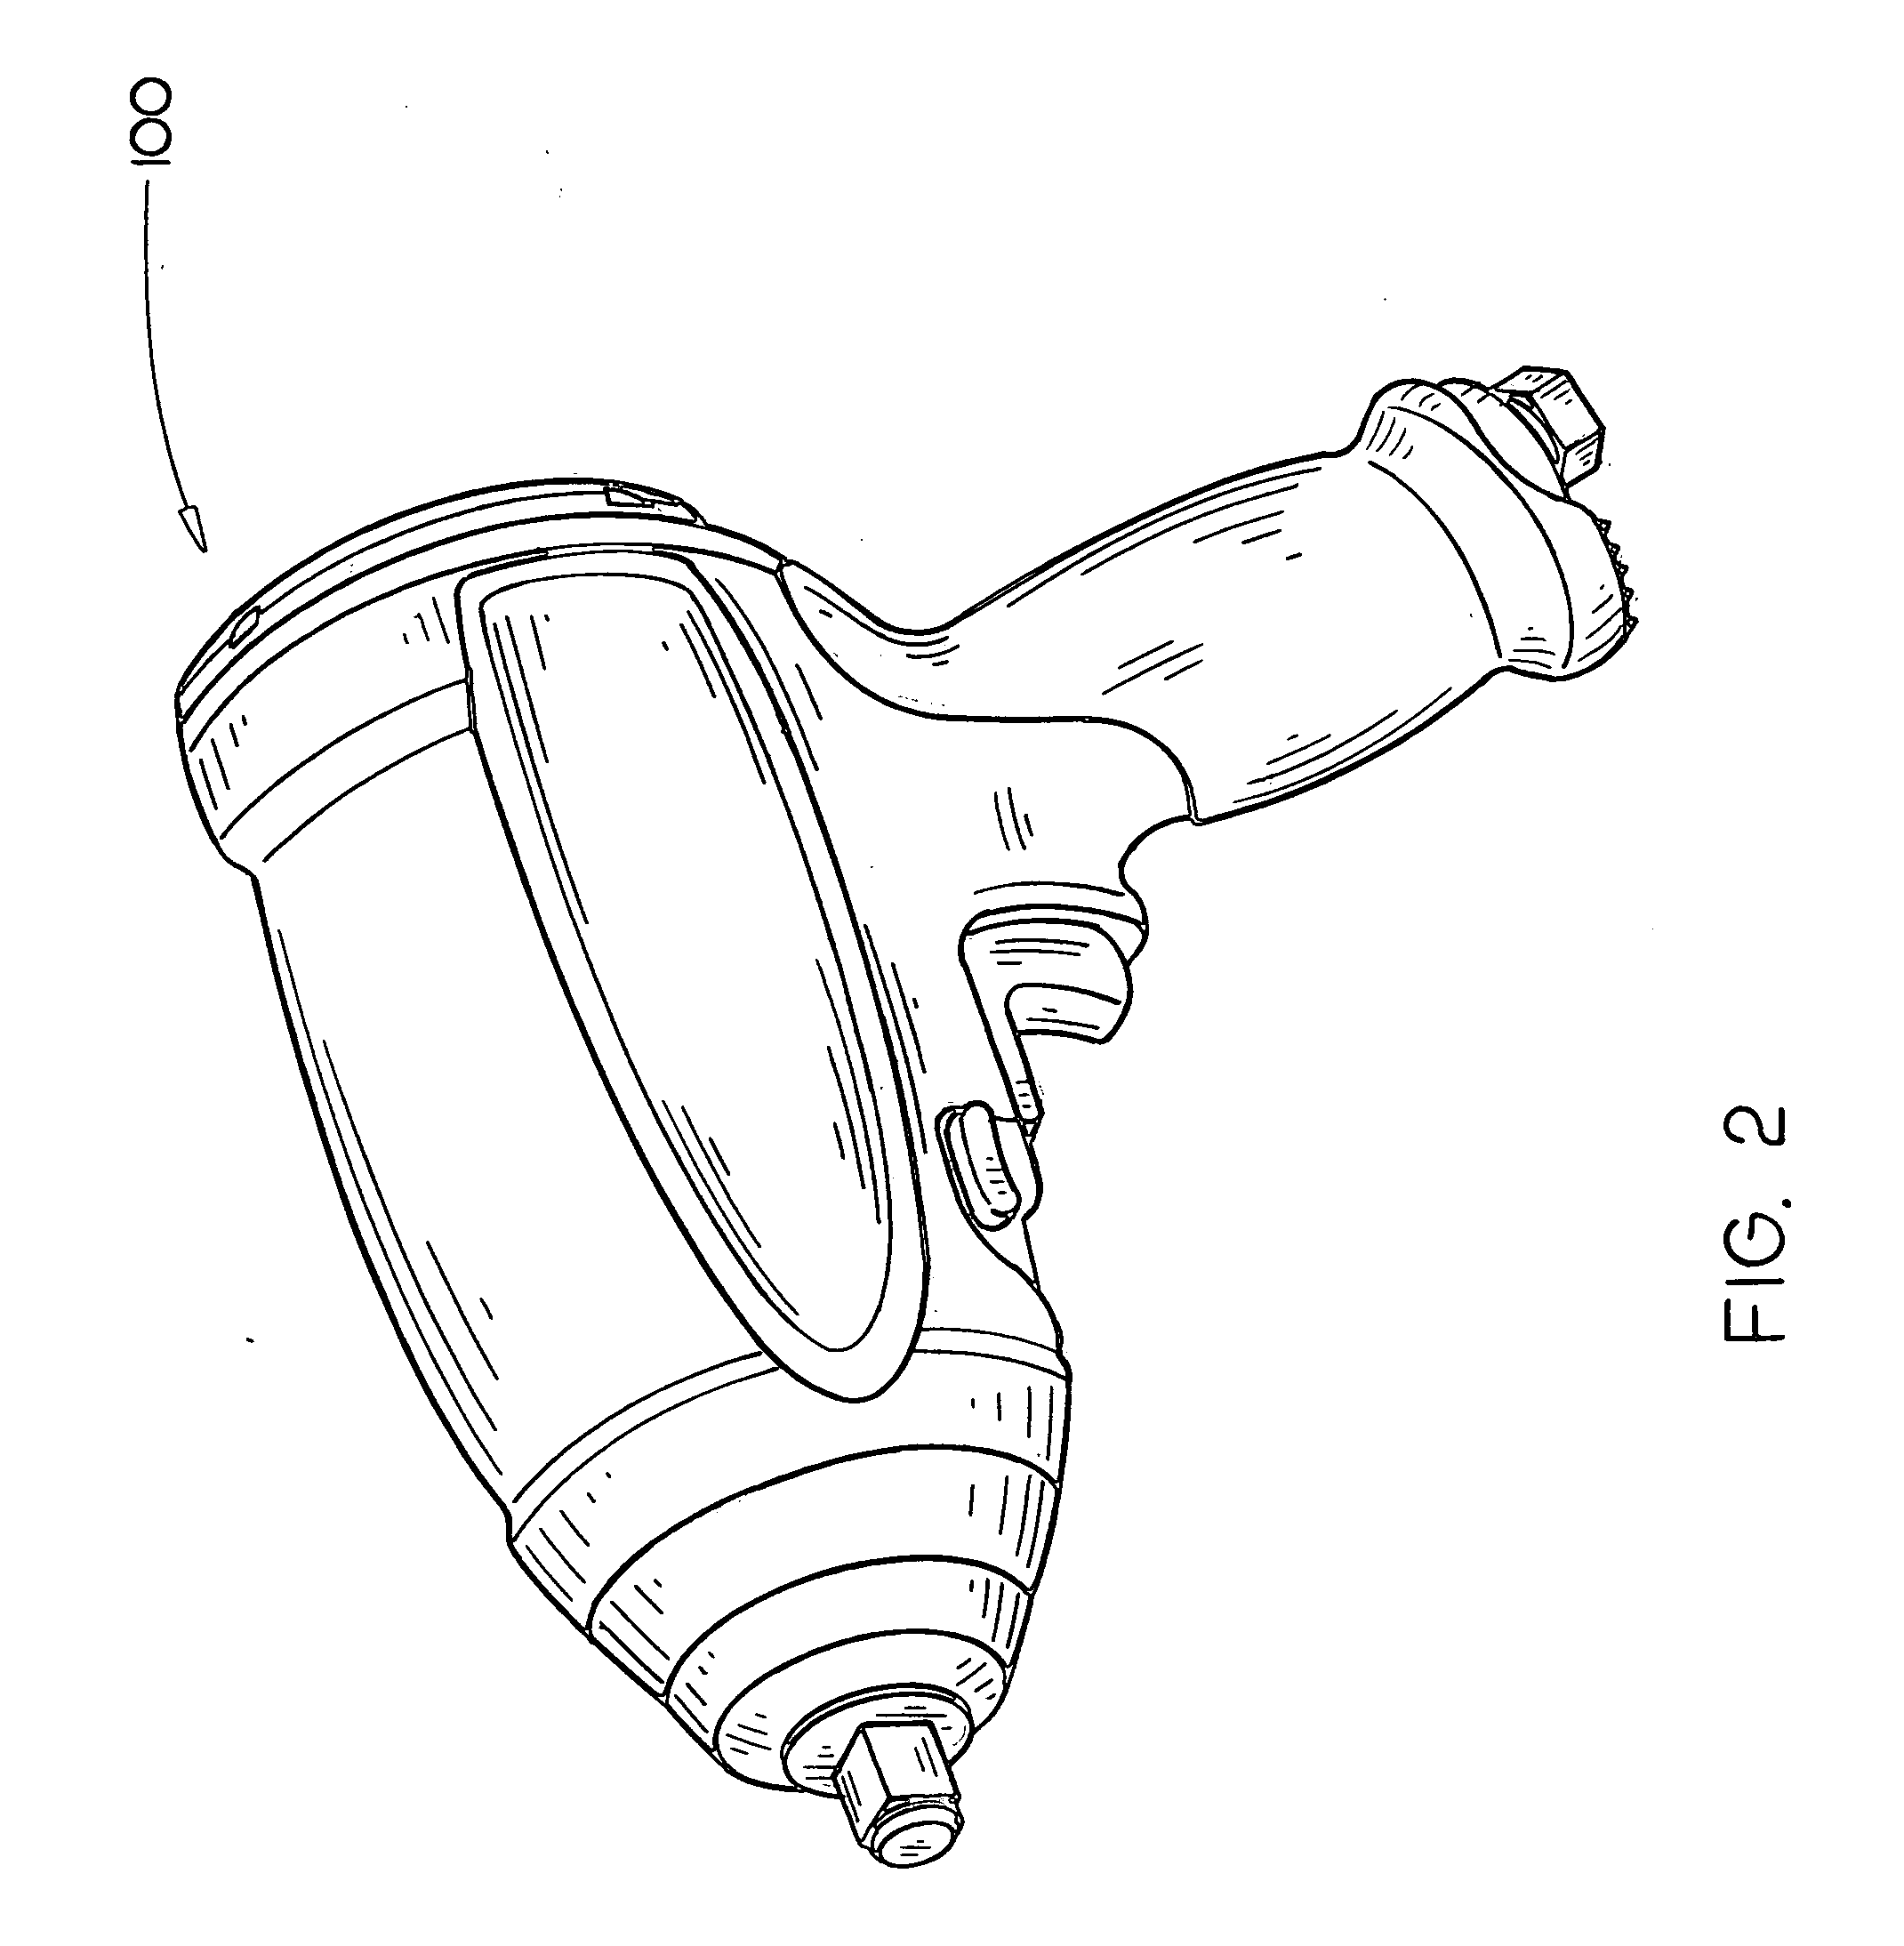 Pneumatically powered rotary tool having linear forward and reverse switch